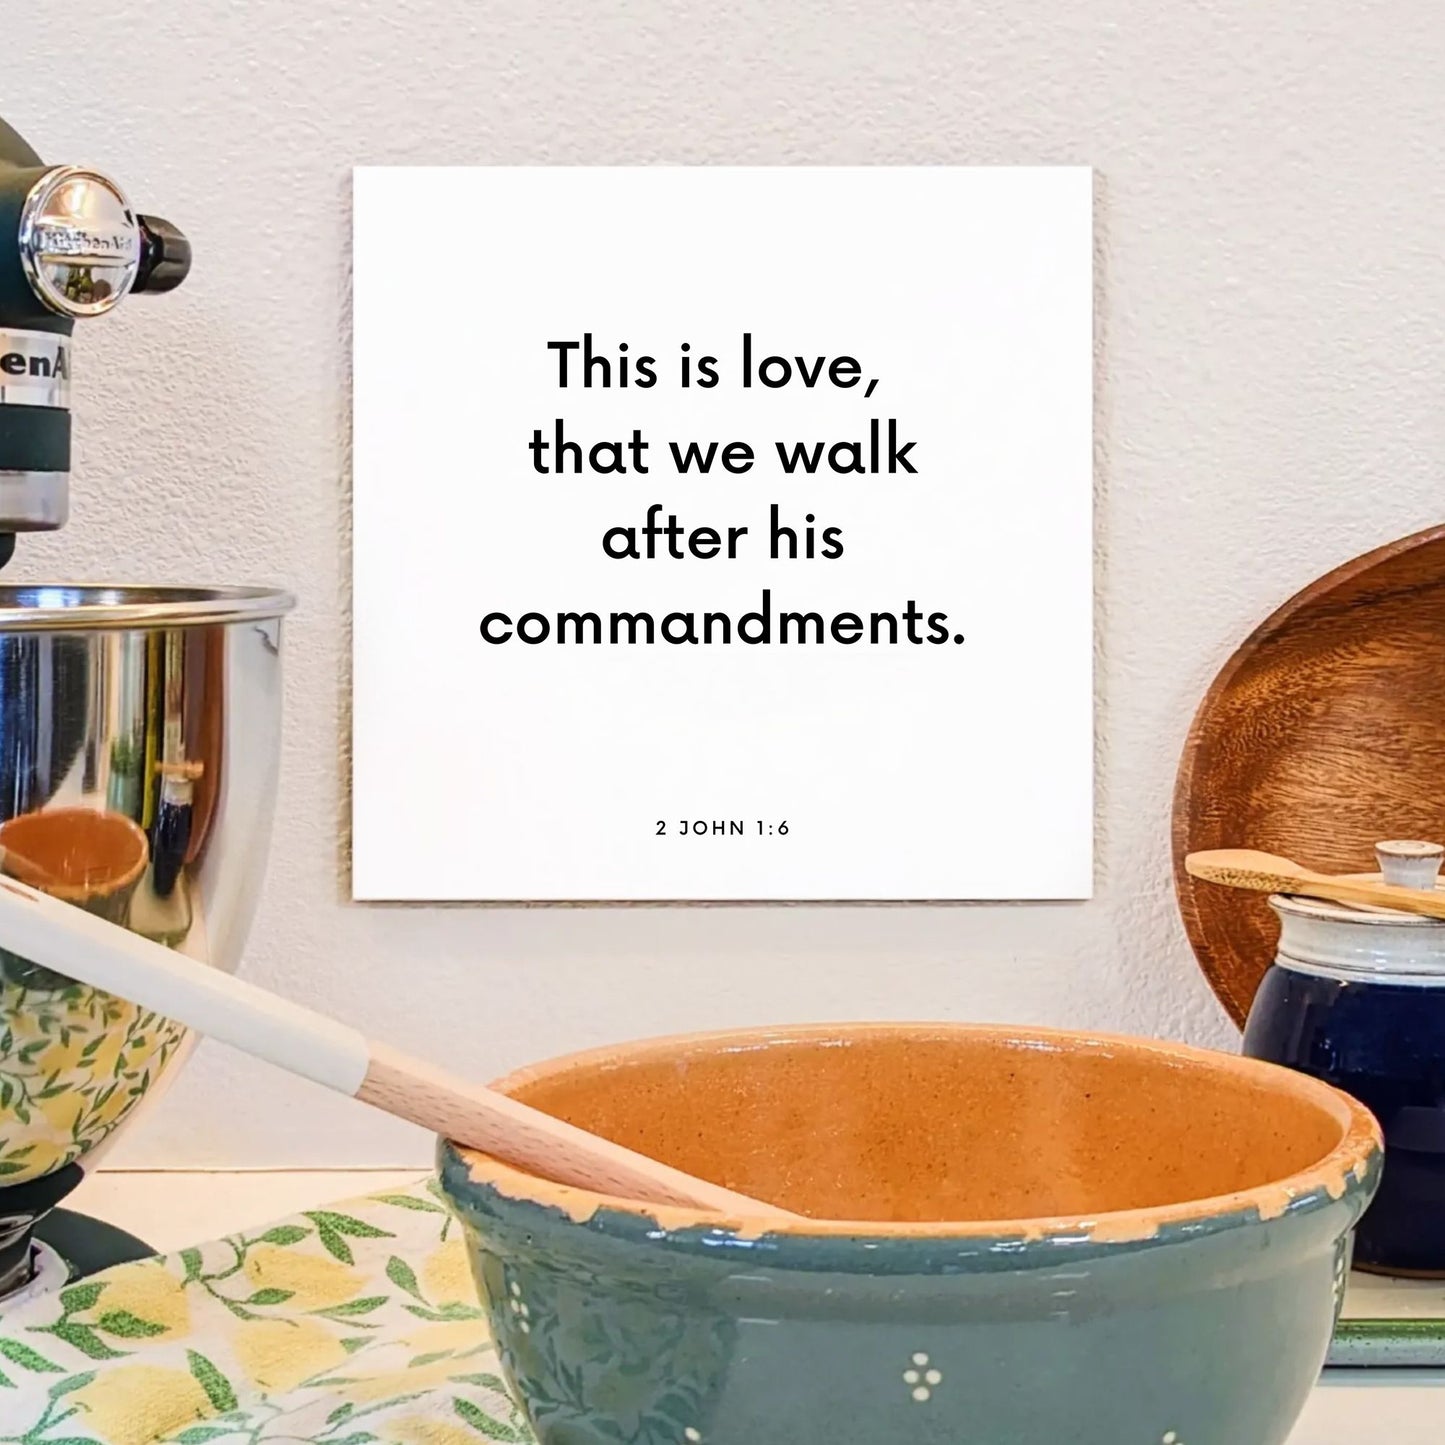 Kitchen mouting of the scripture tile for 2 John 1:6 - "This is love, that we walk after his commandments"